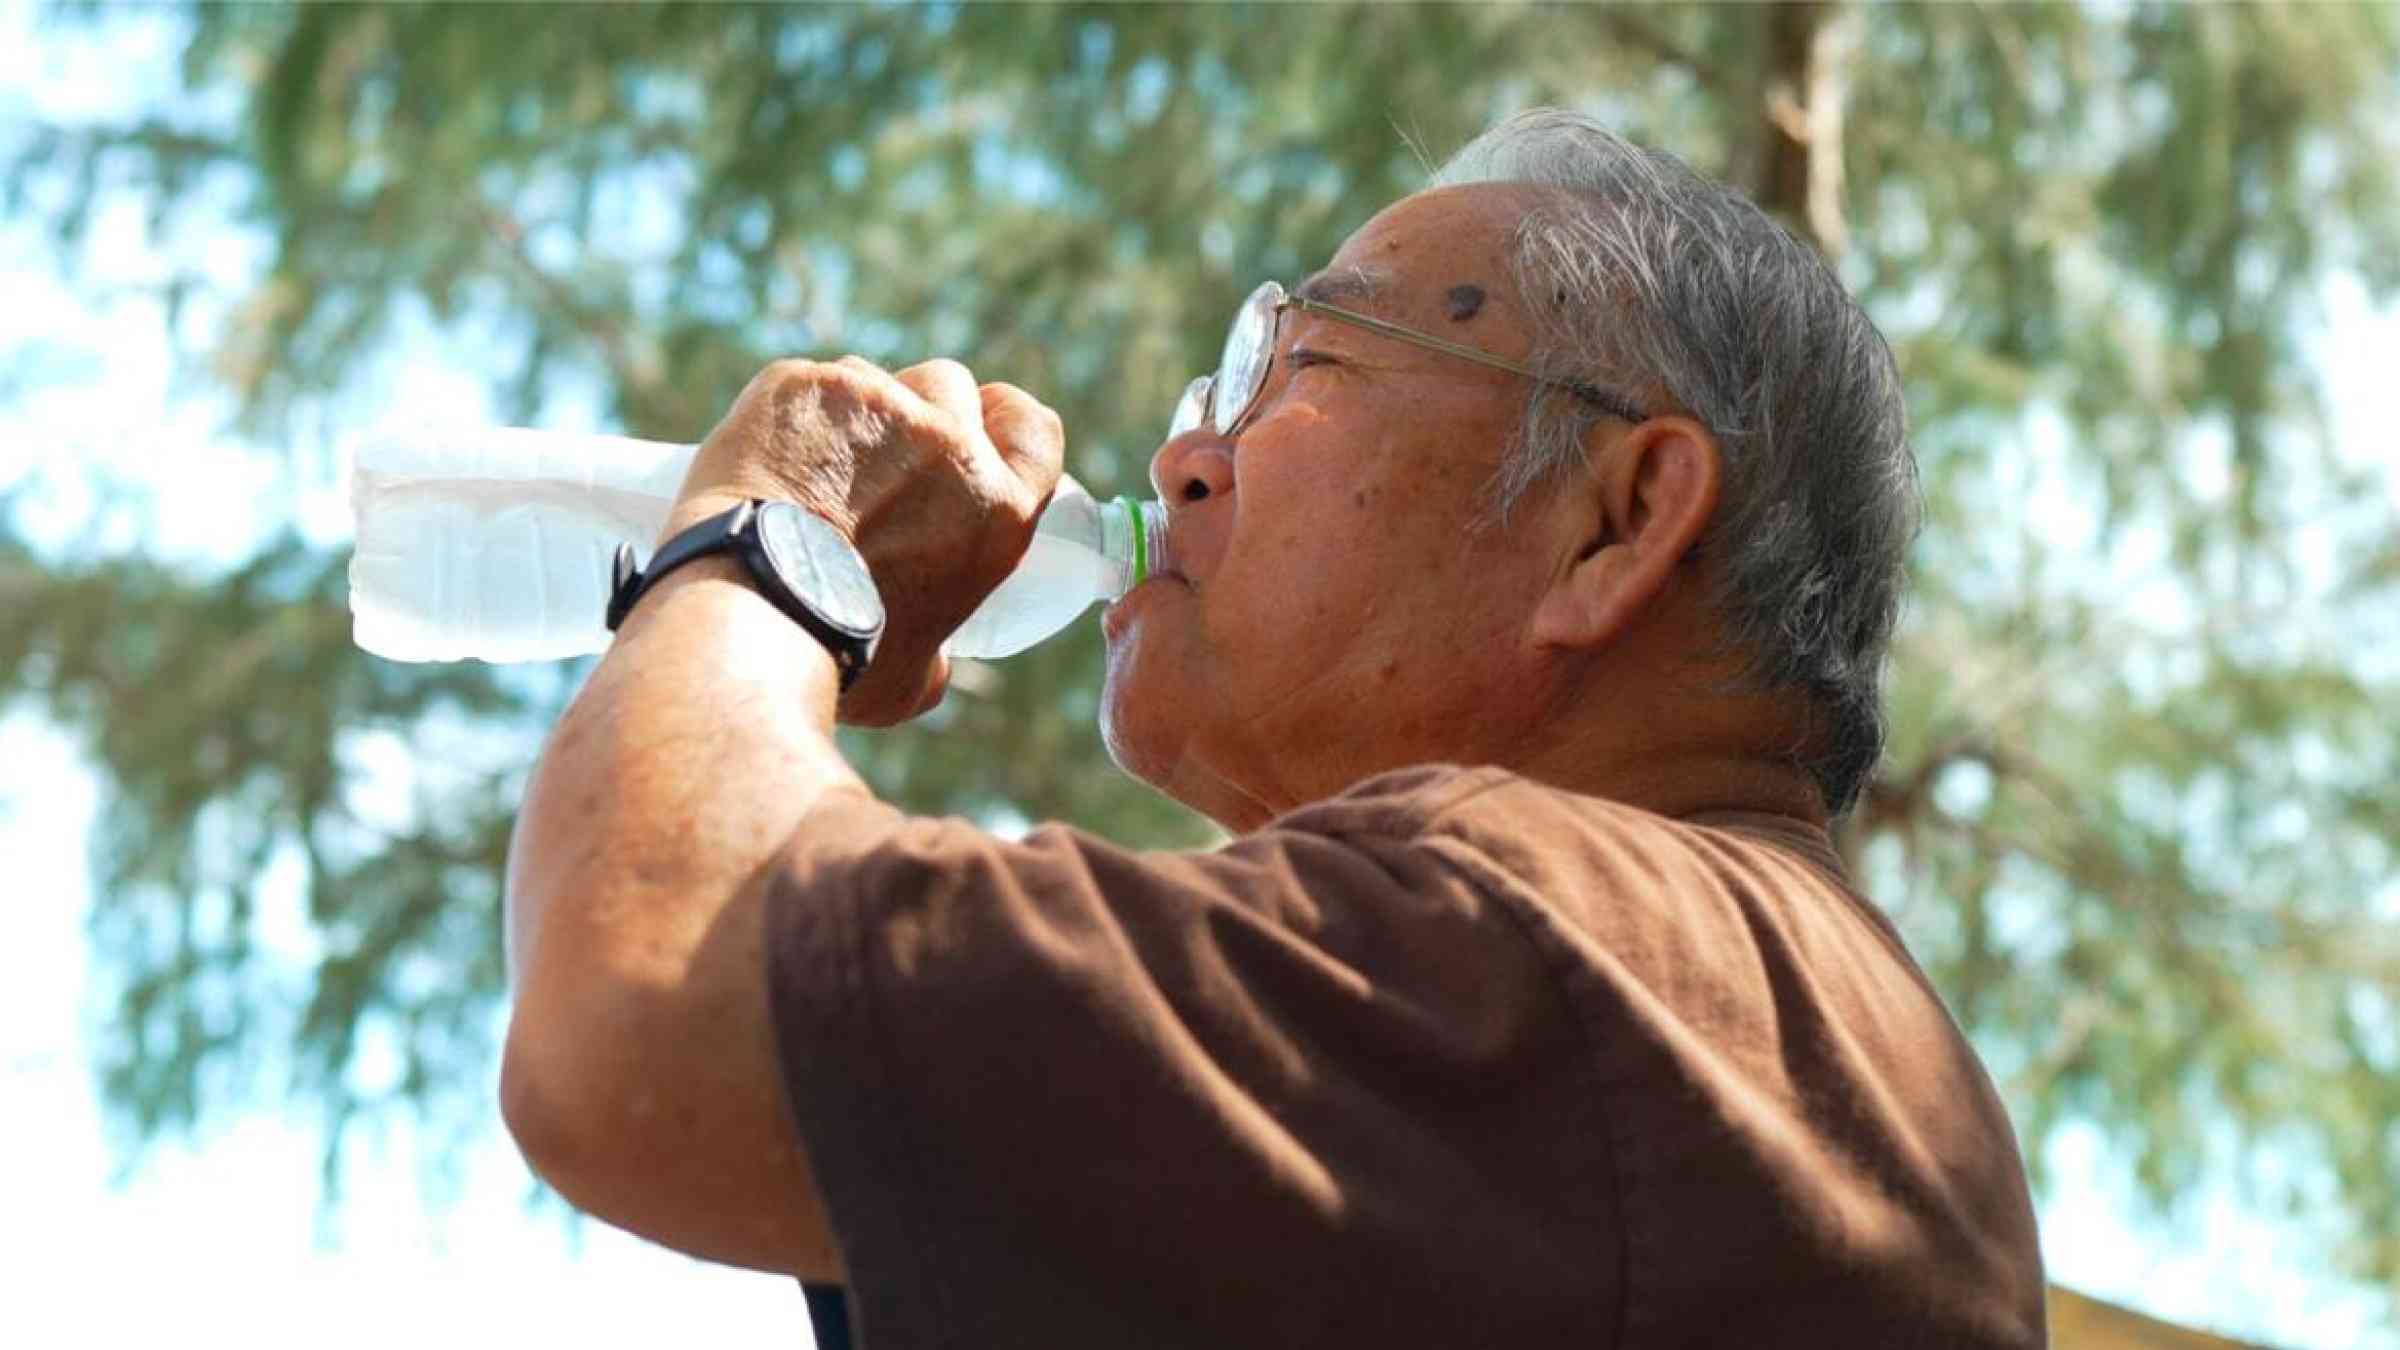 An elderly man drinks from a water bottle on a hot day